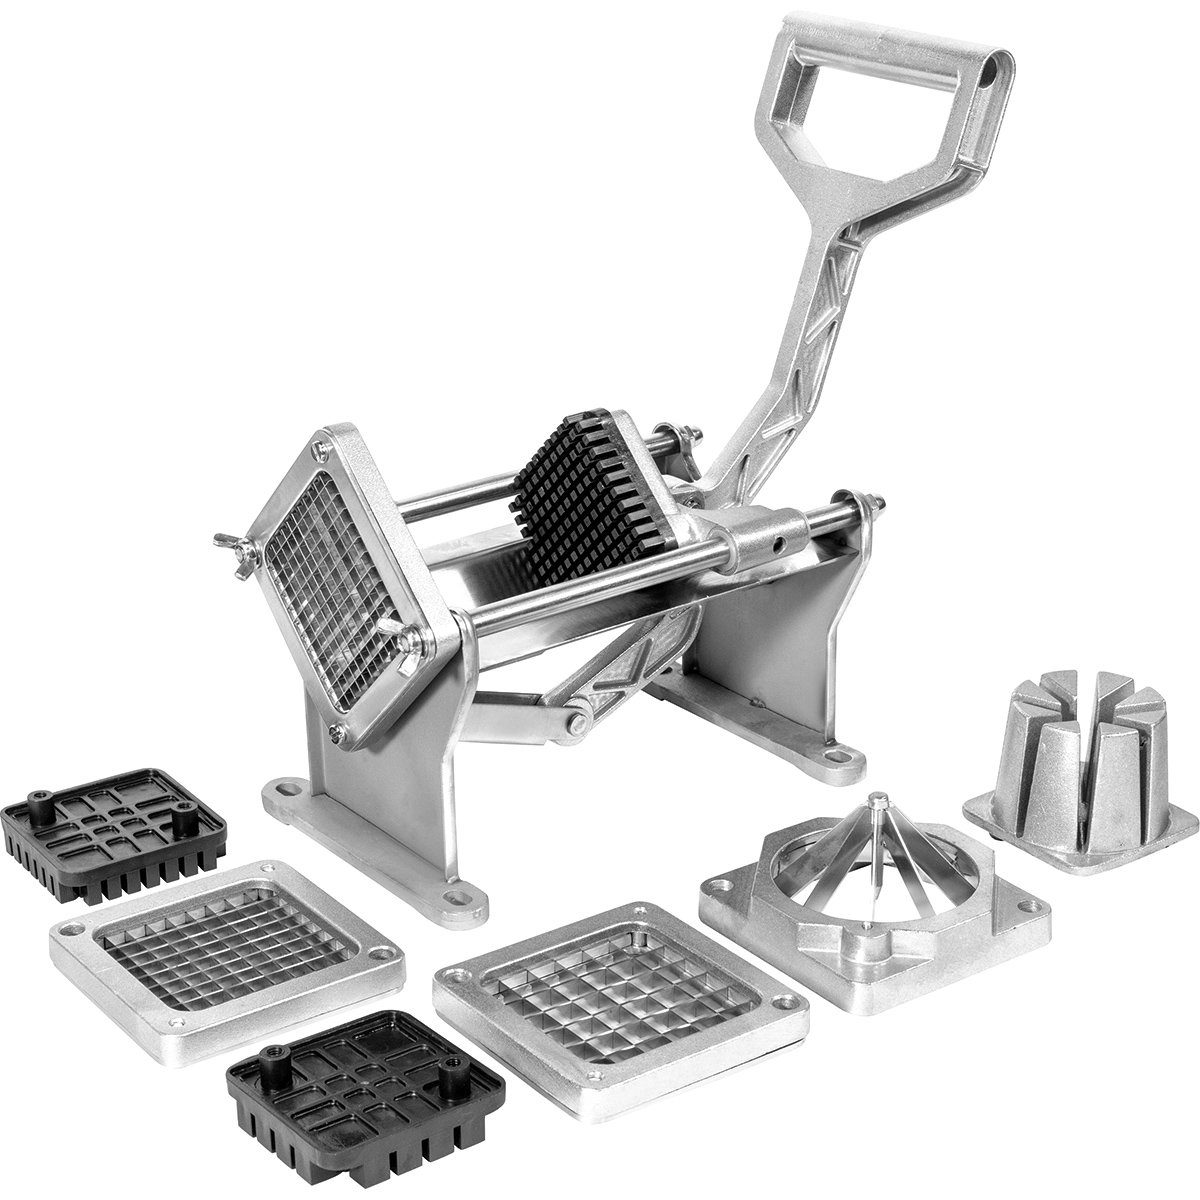 Weston Professional French Fry Cutter and Vegetable Dicer, Stainless Steel